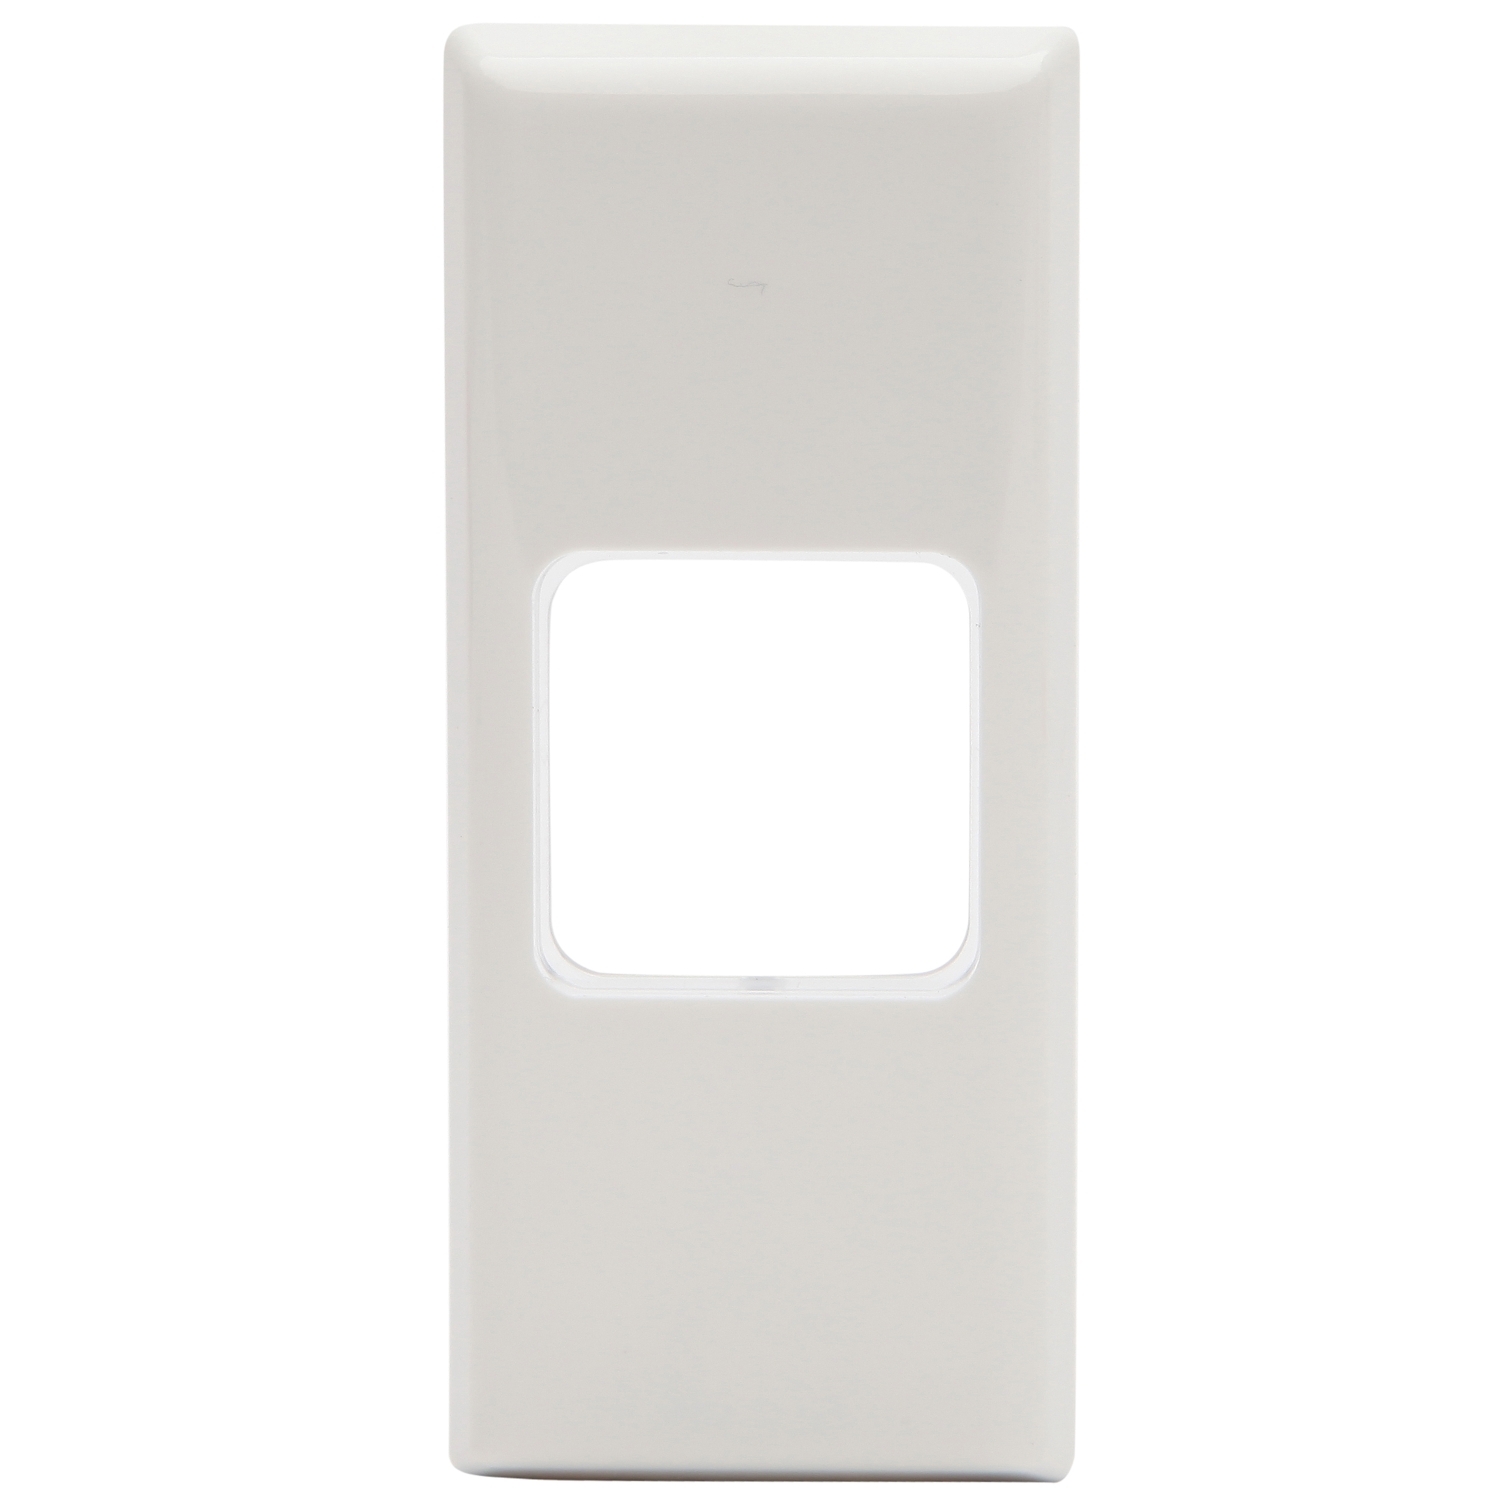 PDL 600 Series - Grid + Cover Architrave Switch 1-Gang - White